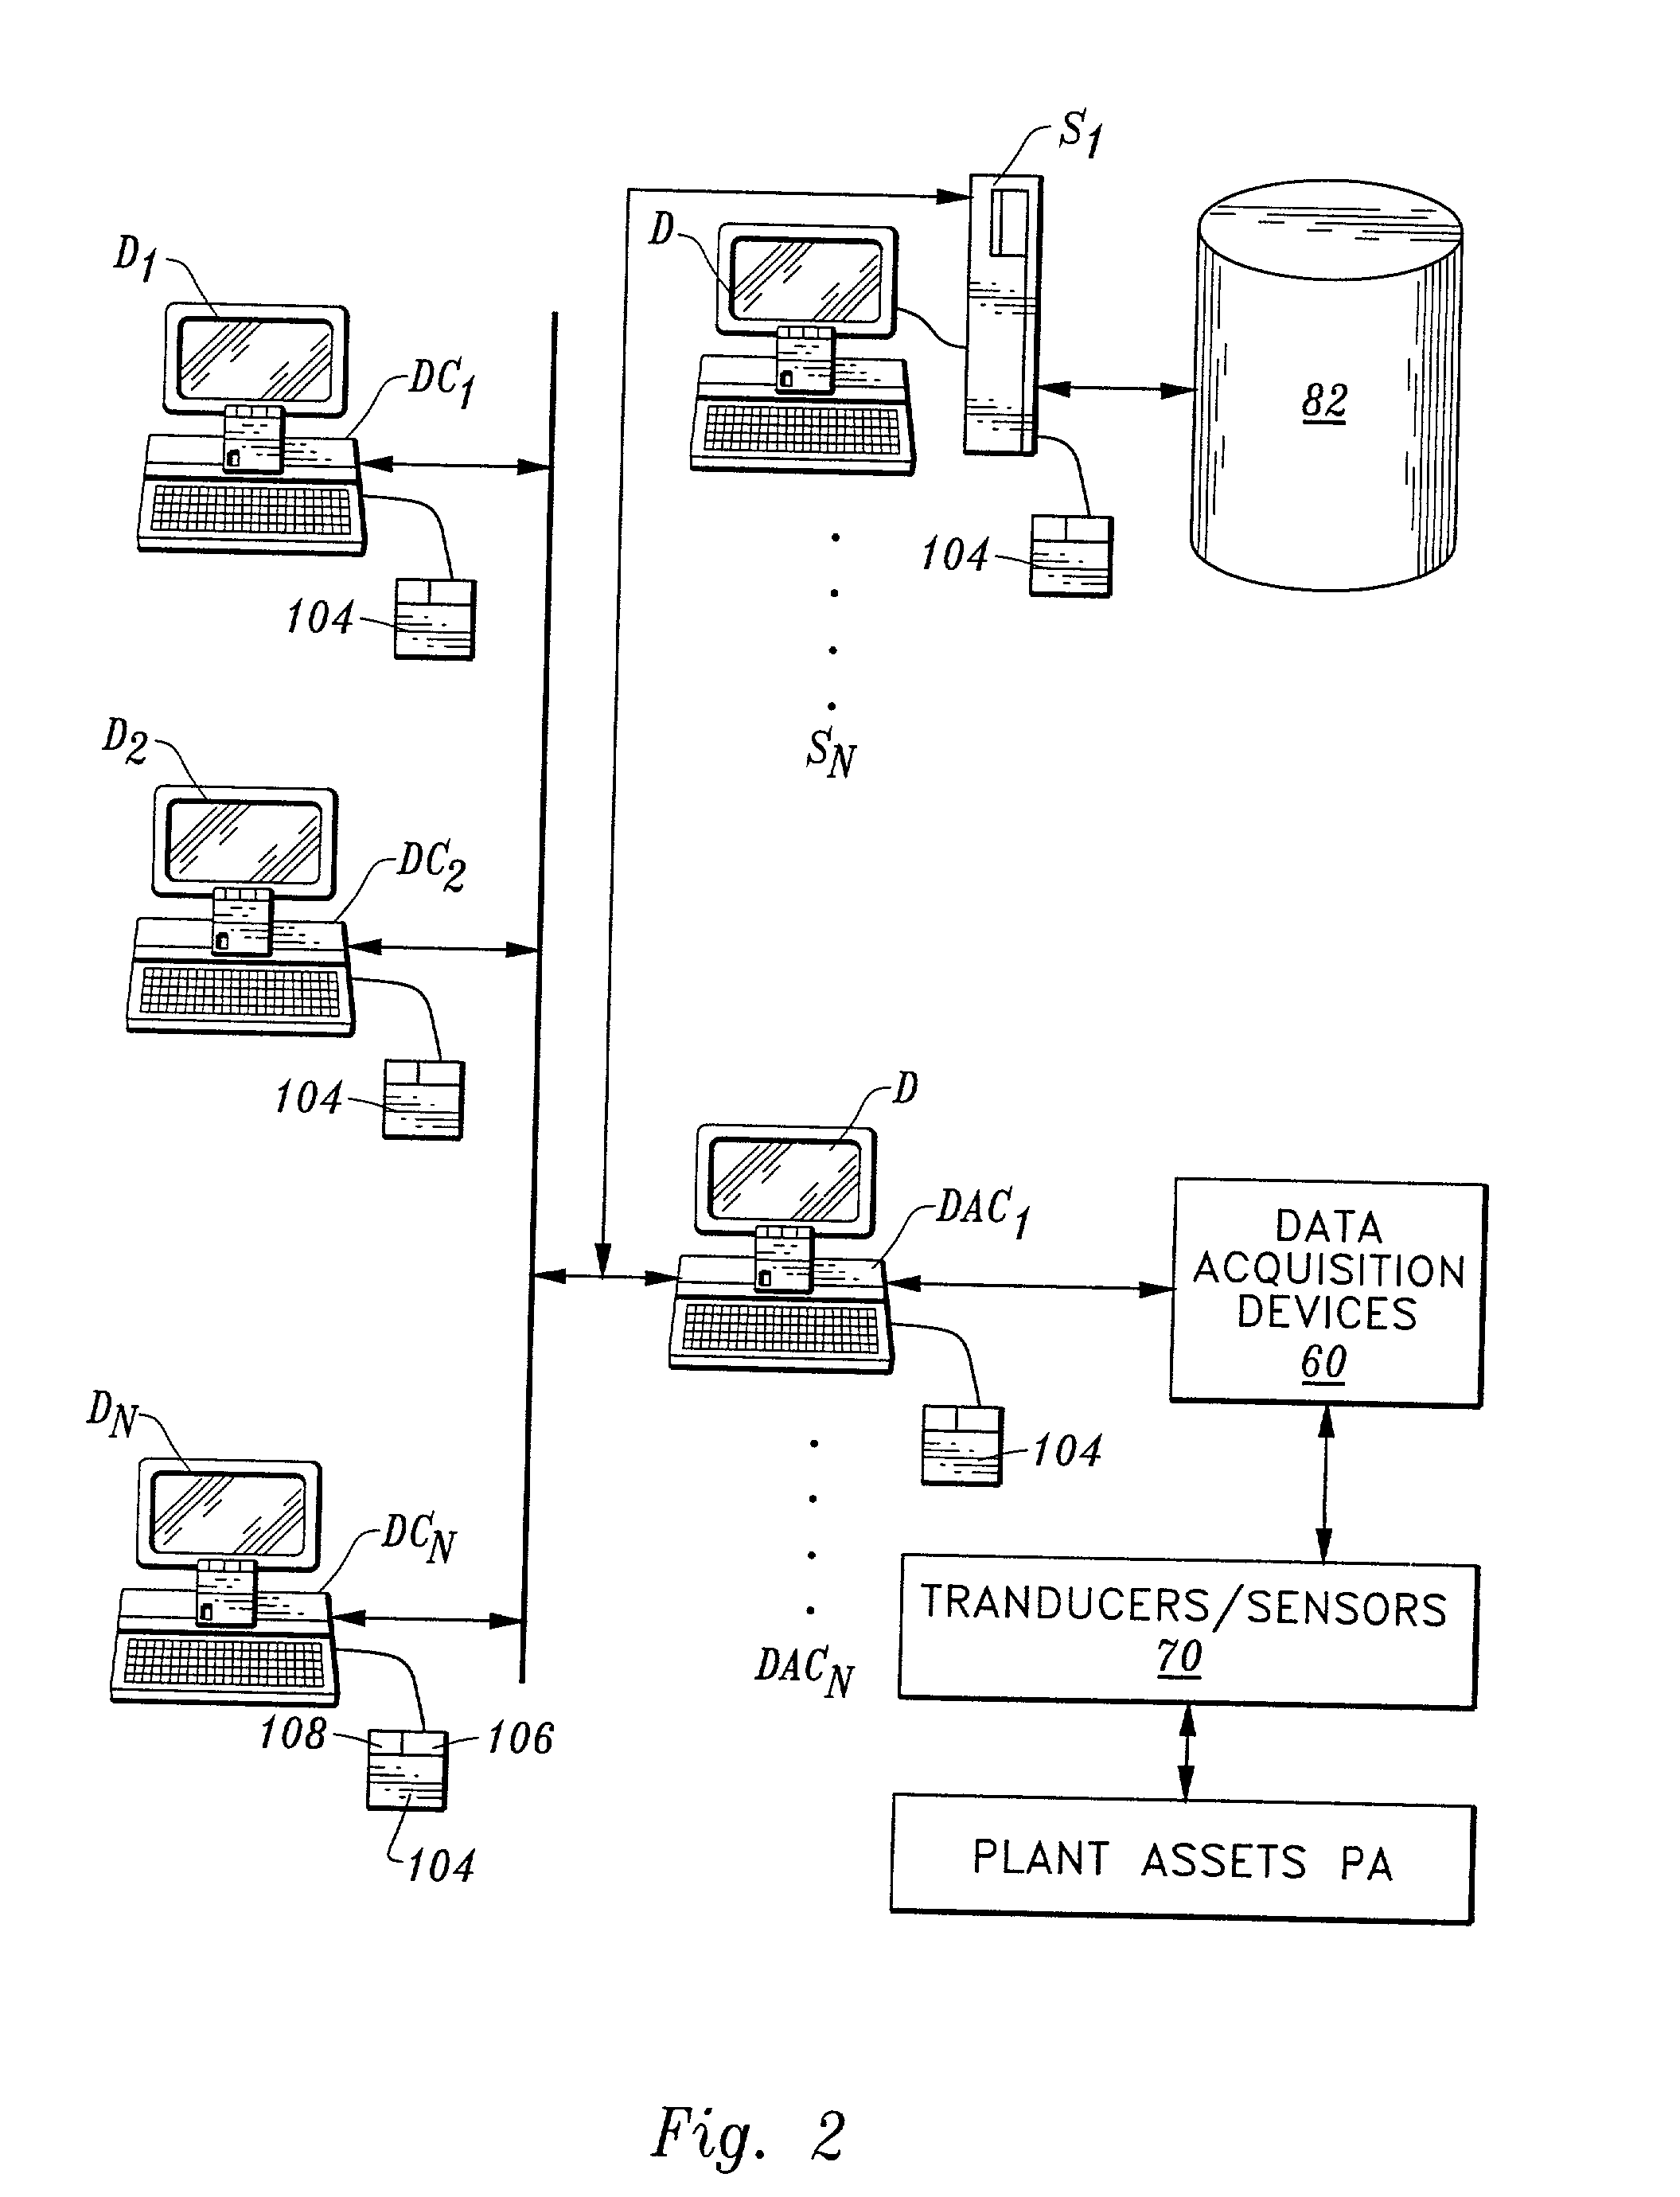 Industrial plant asset management system: apparatus and method